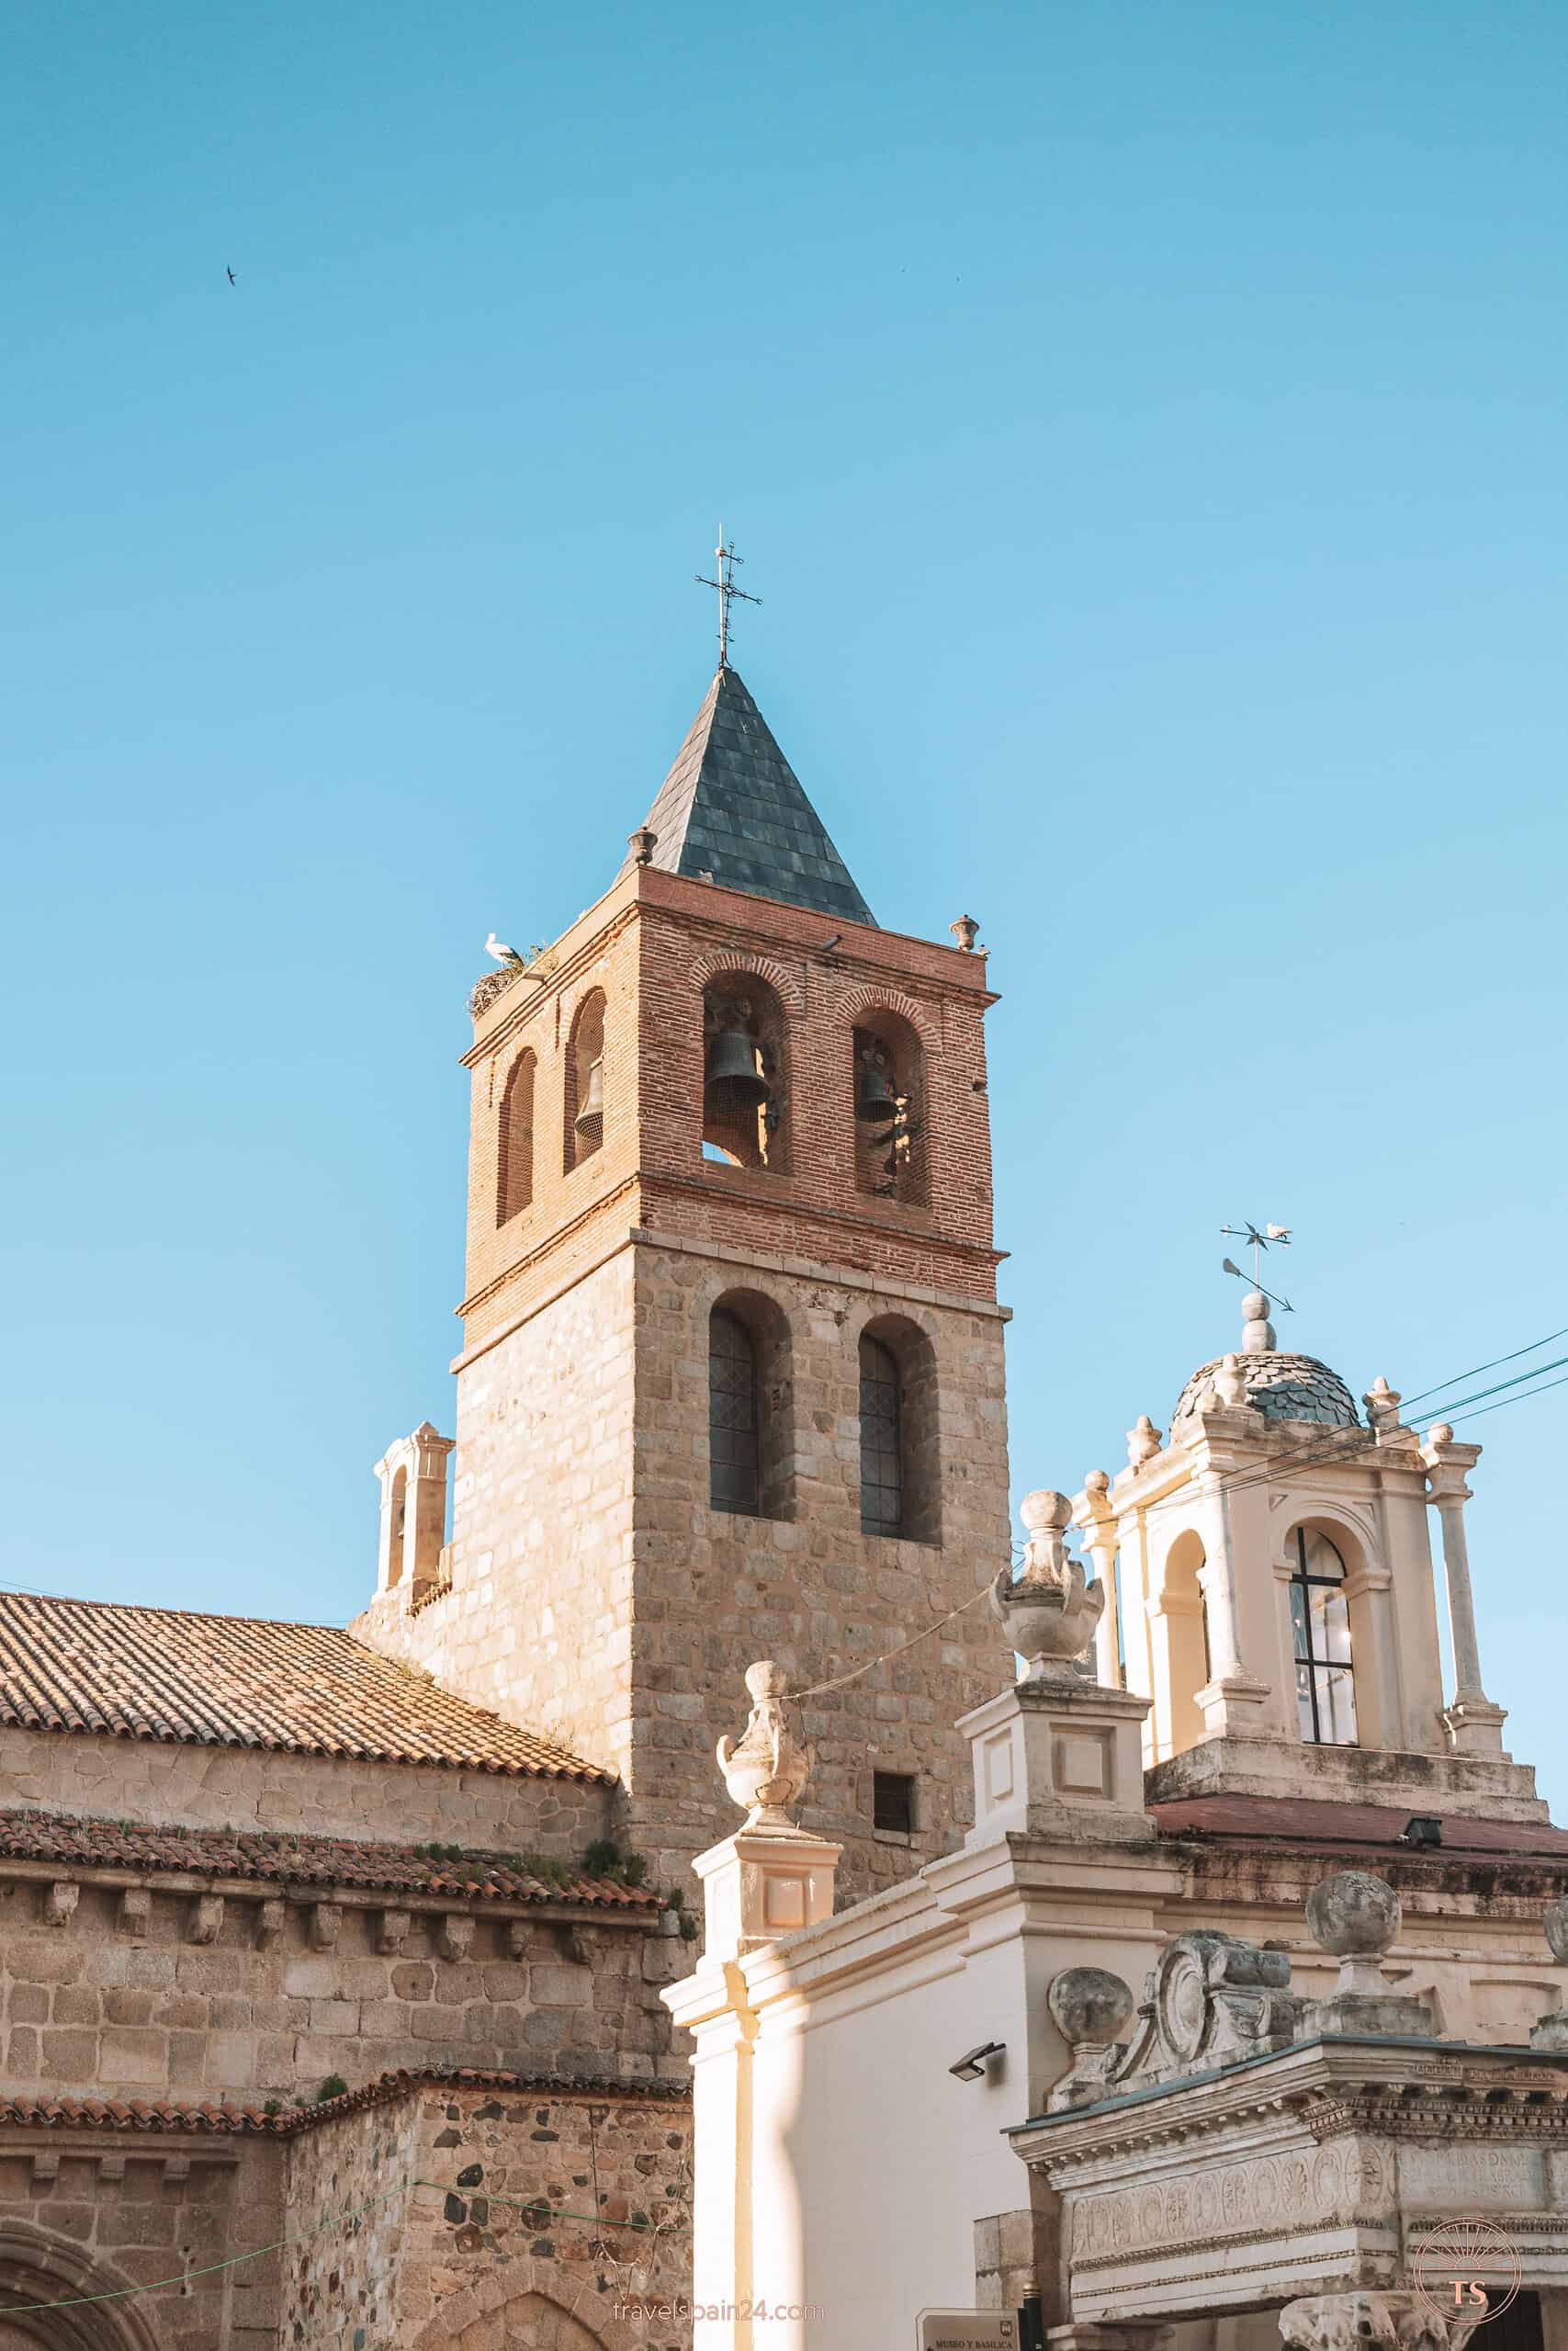 The tower of Basilica of Santa Eulalia in Mérida topped with a cross and a stork perched at the peak, with large church bells visible—a significant historical landmark in the city.